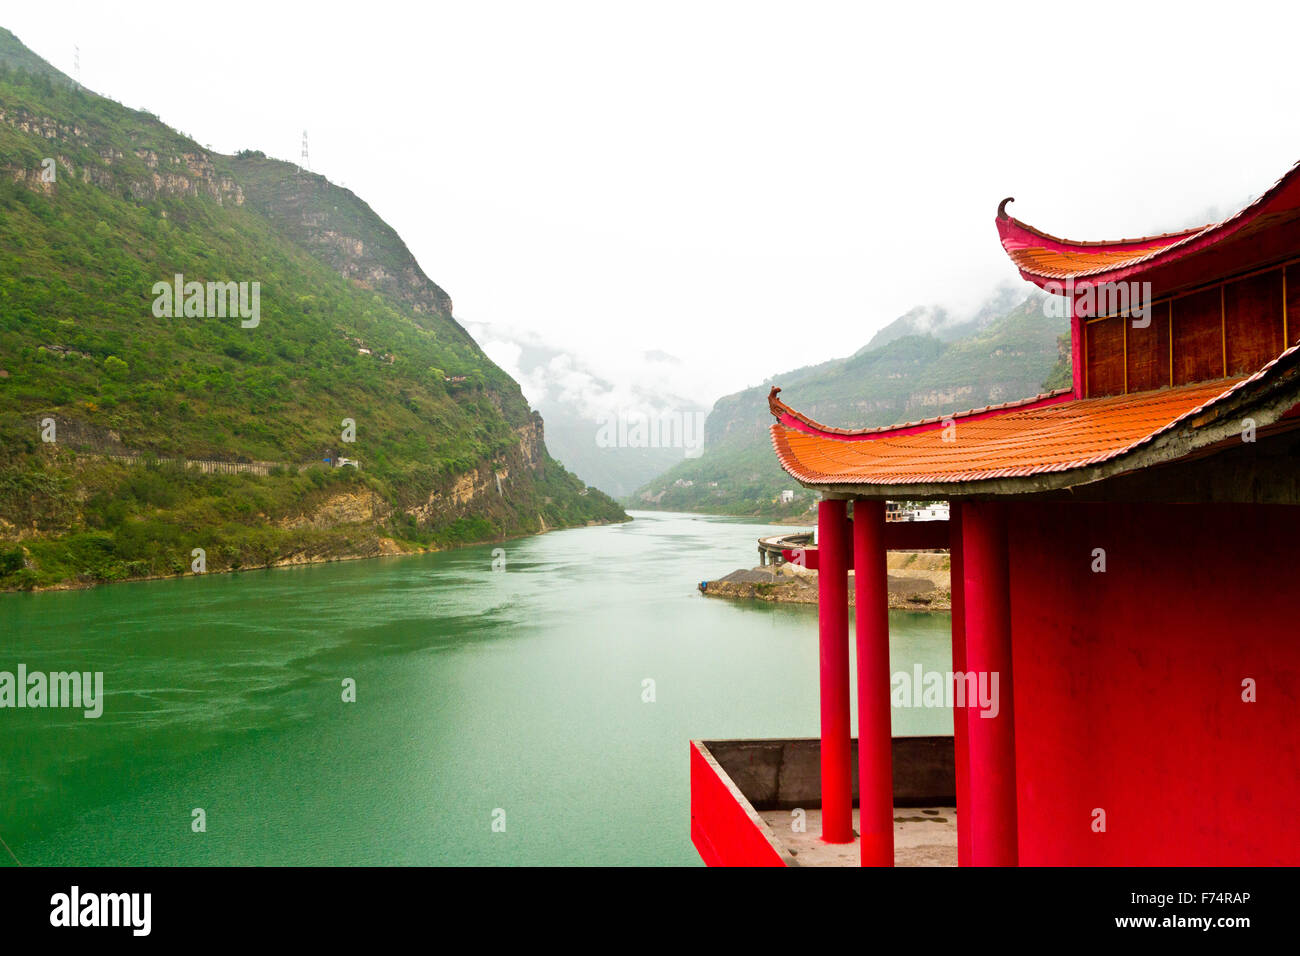 The emerald green water of the mighty Yangtze river viewed nearby Xinshizhen town, China. Stock Photo